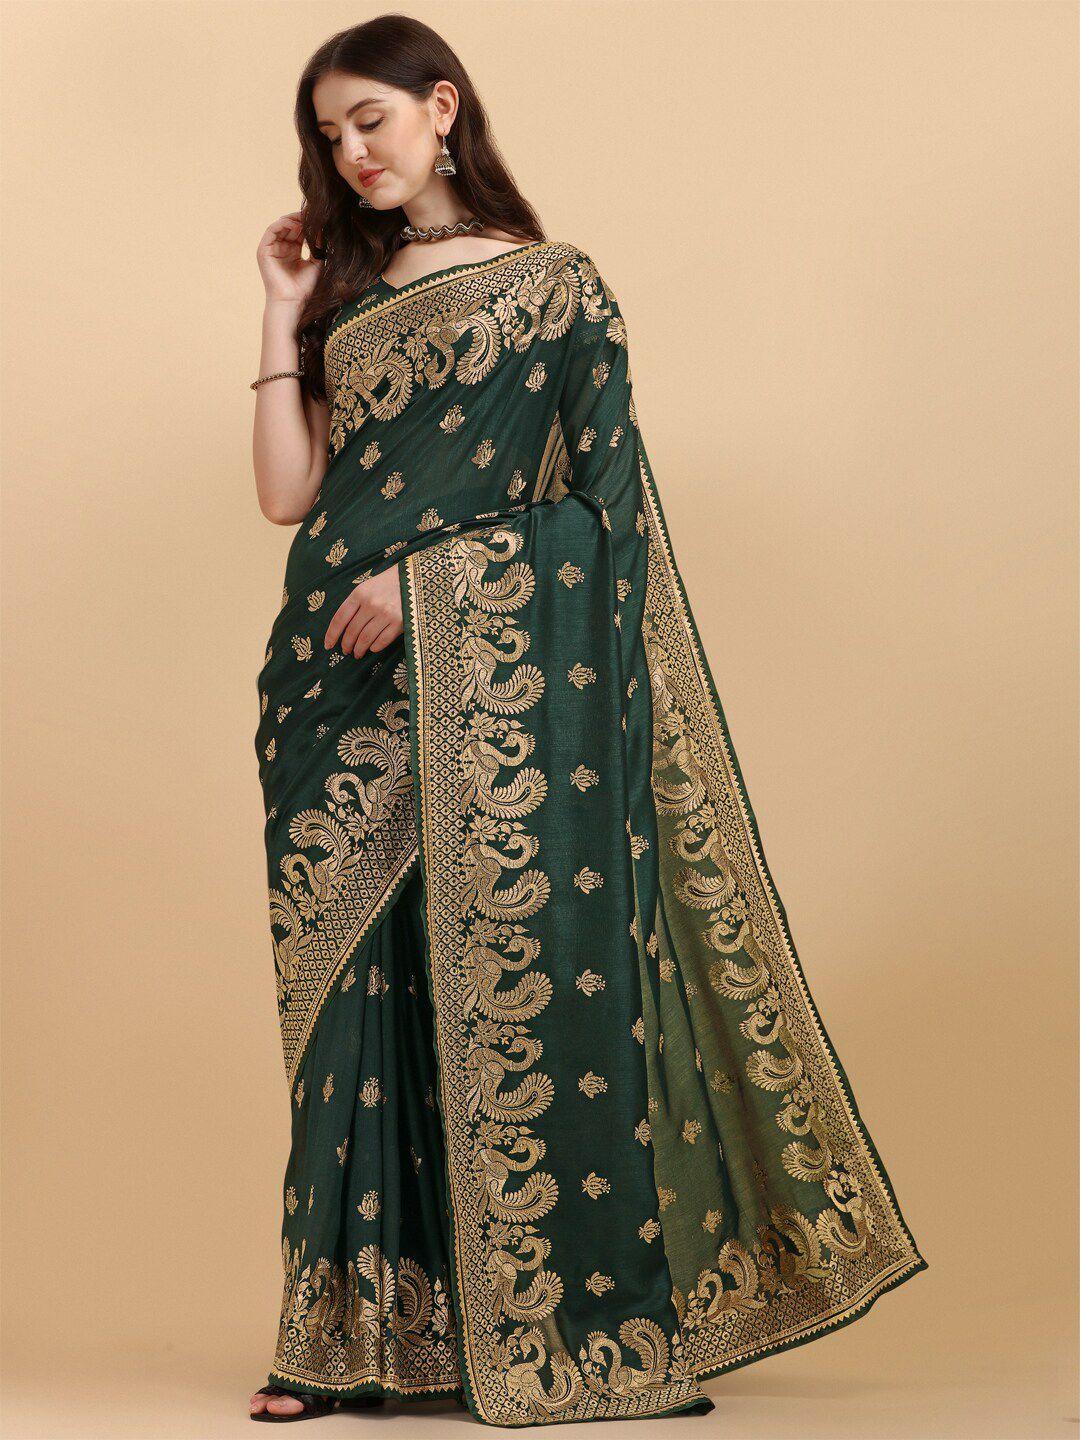 mitera olive green & gold-toned ethnic motifs embroidered saree